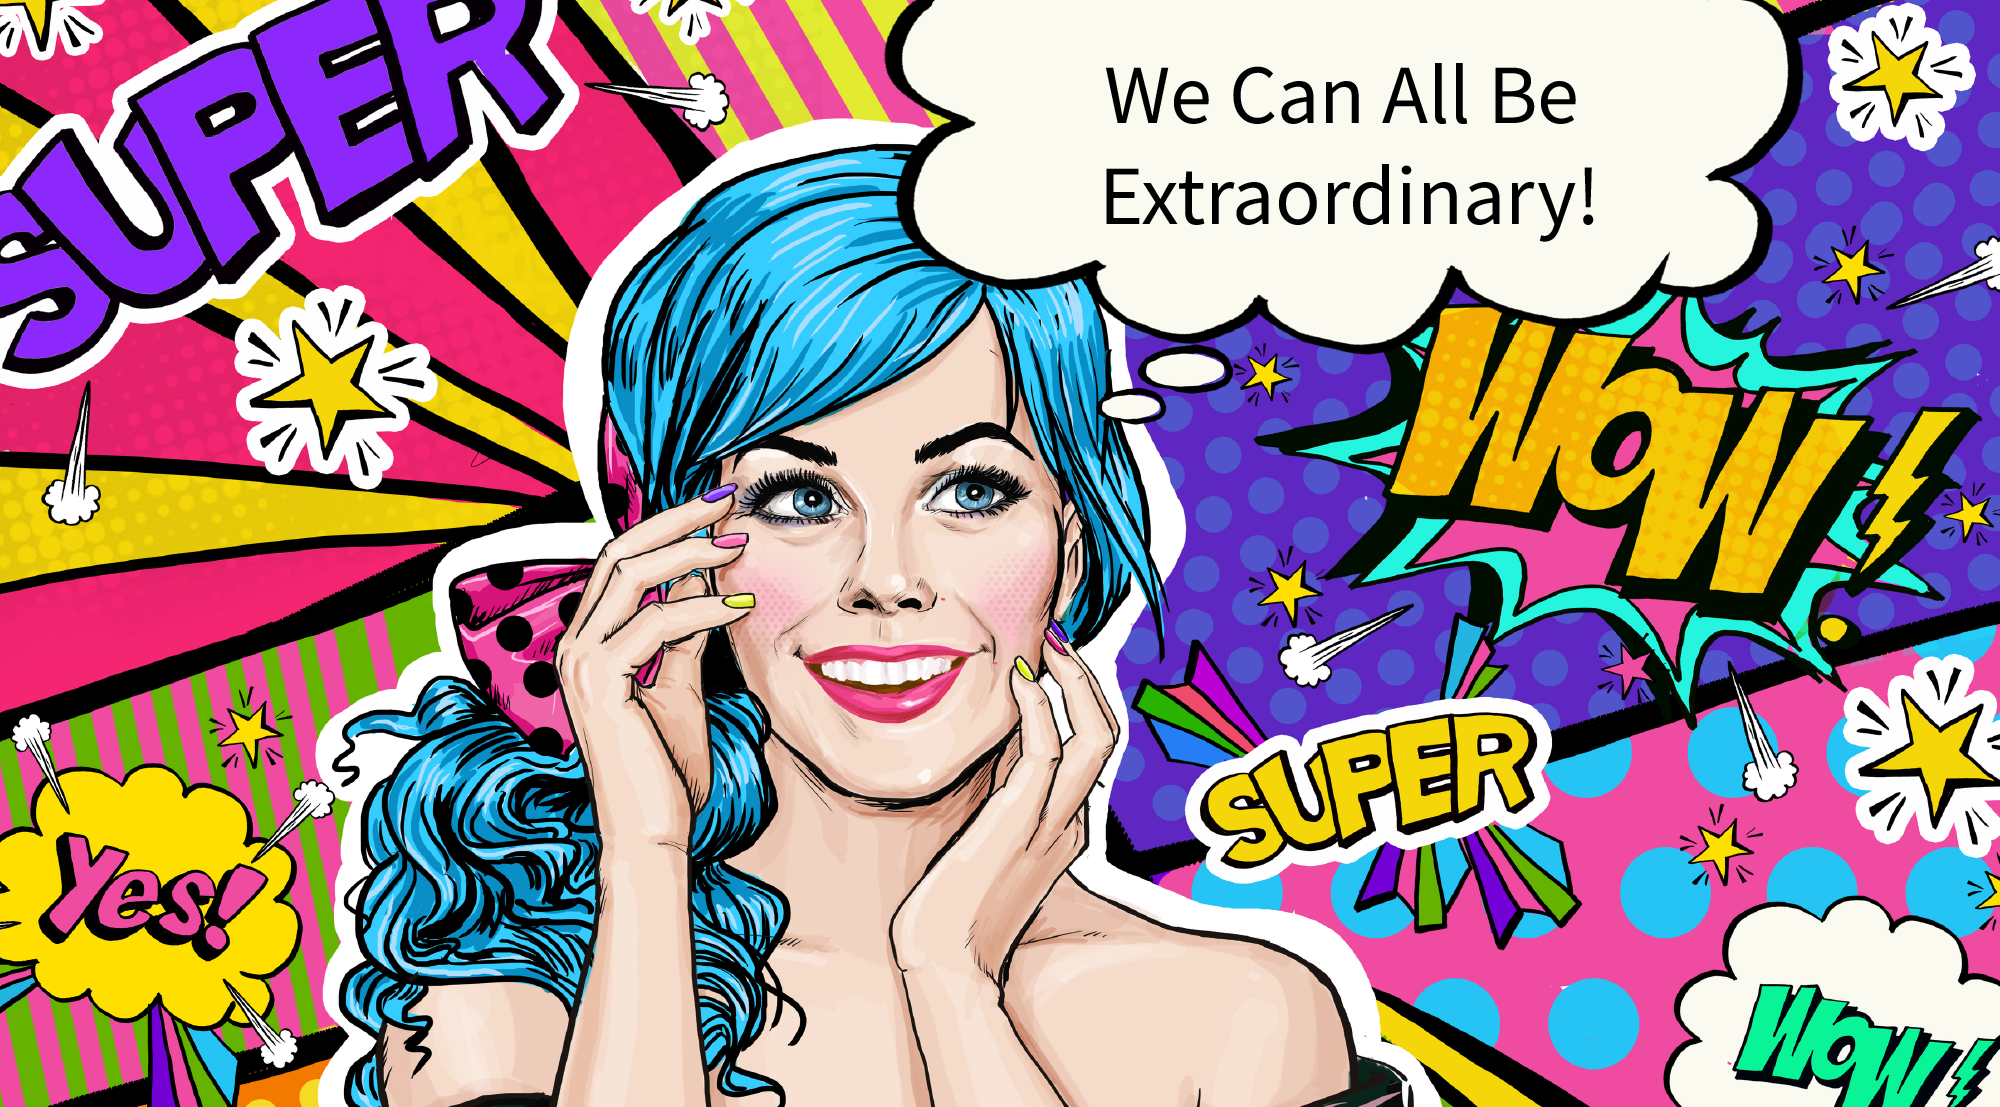 We can all be extraordinary